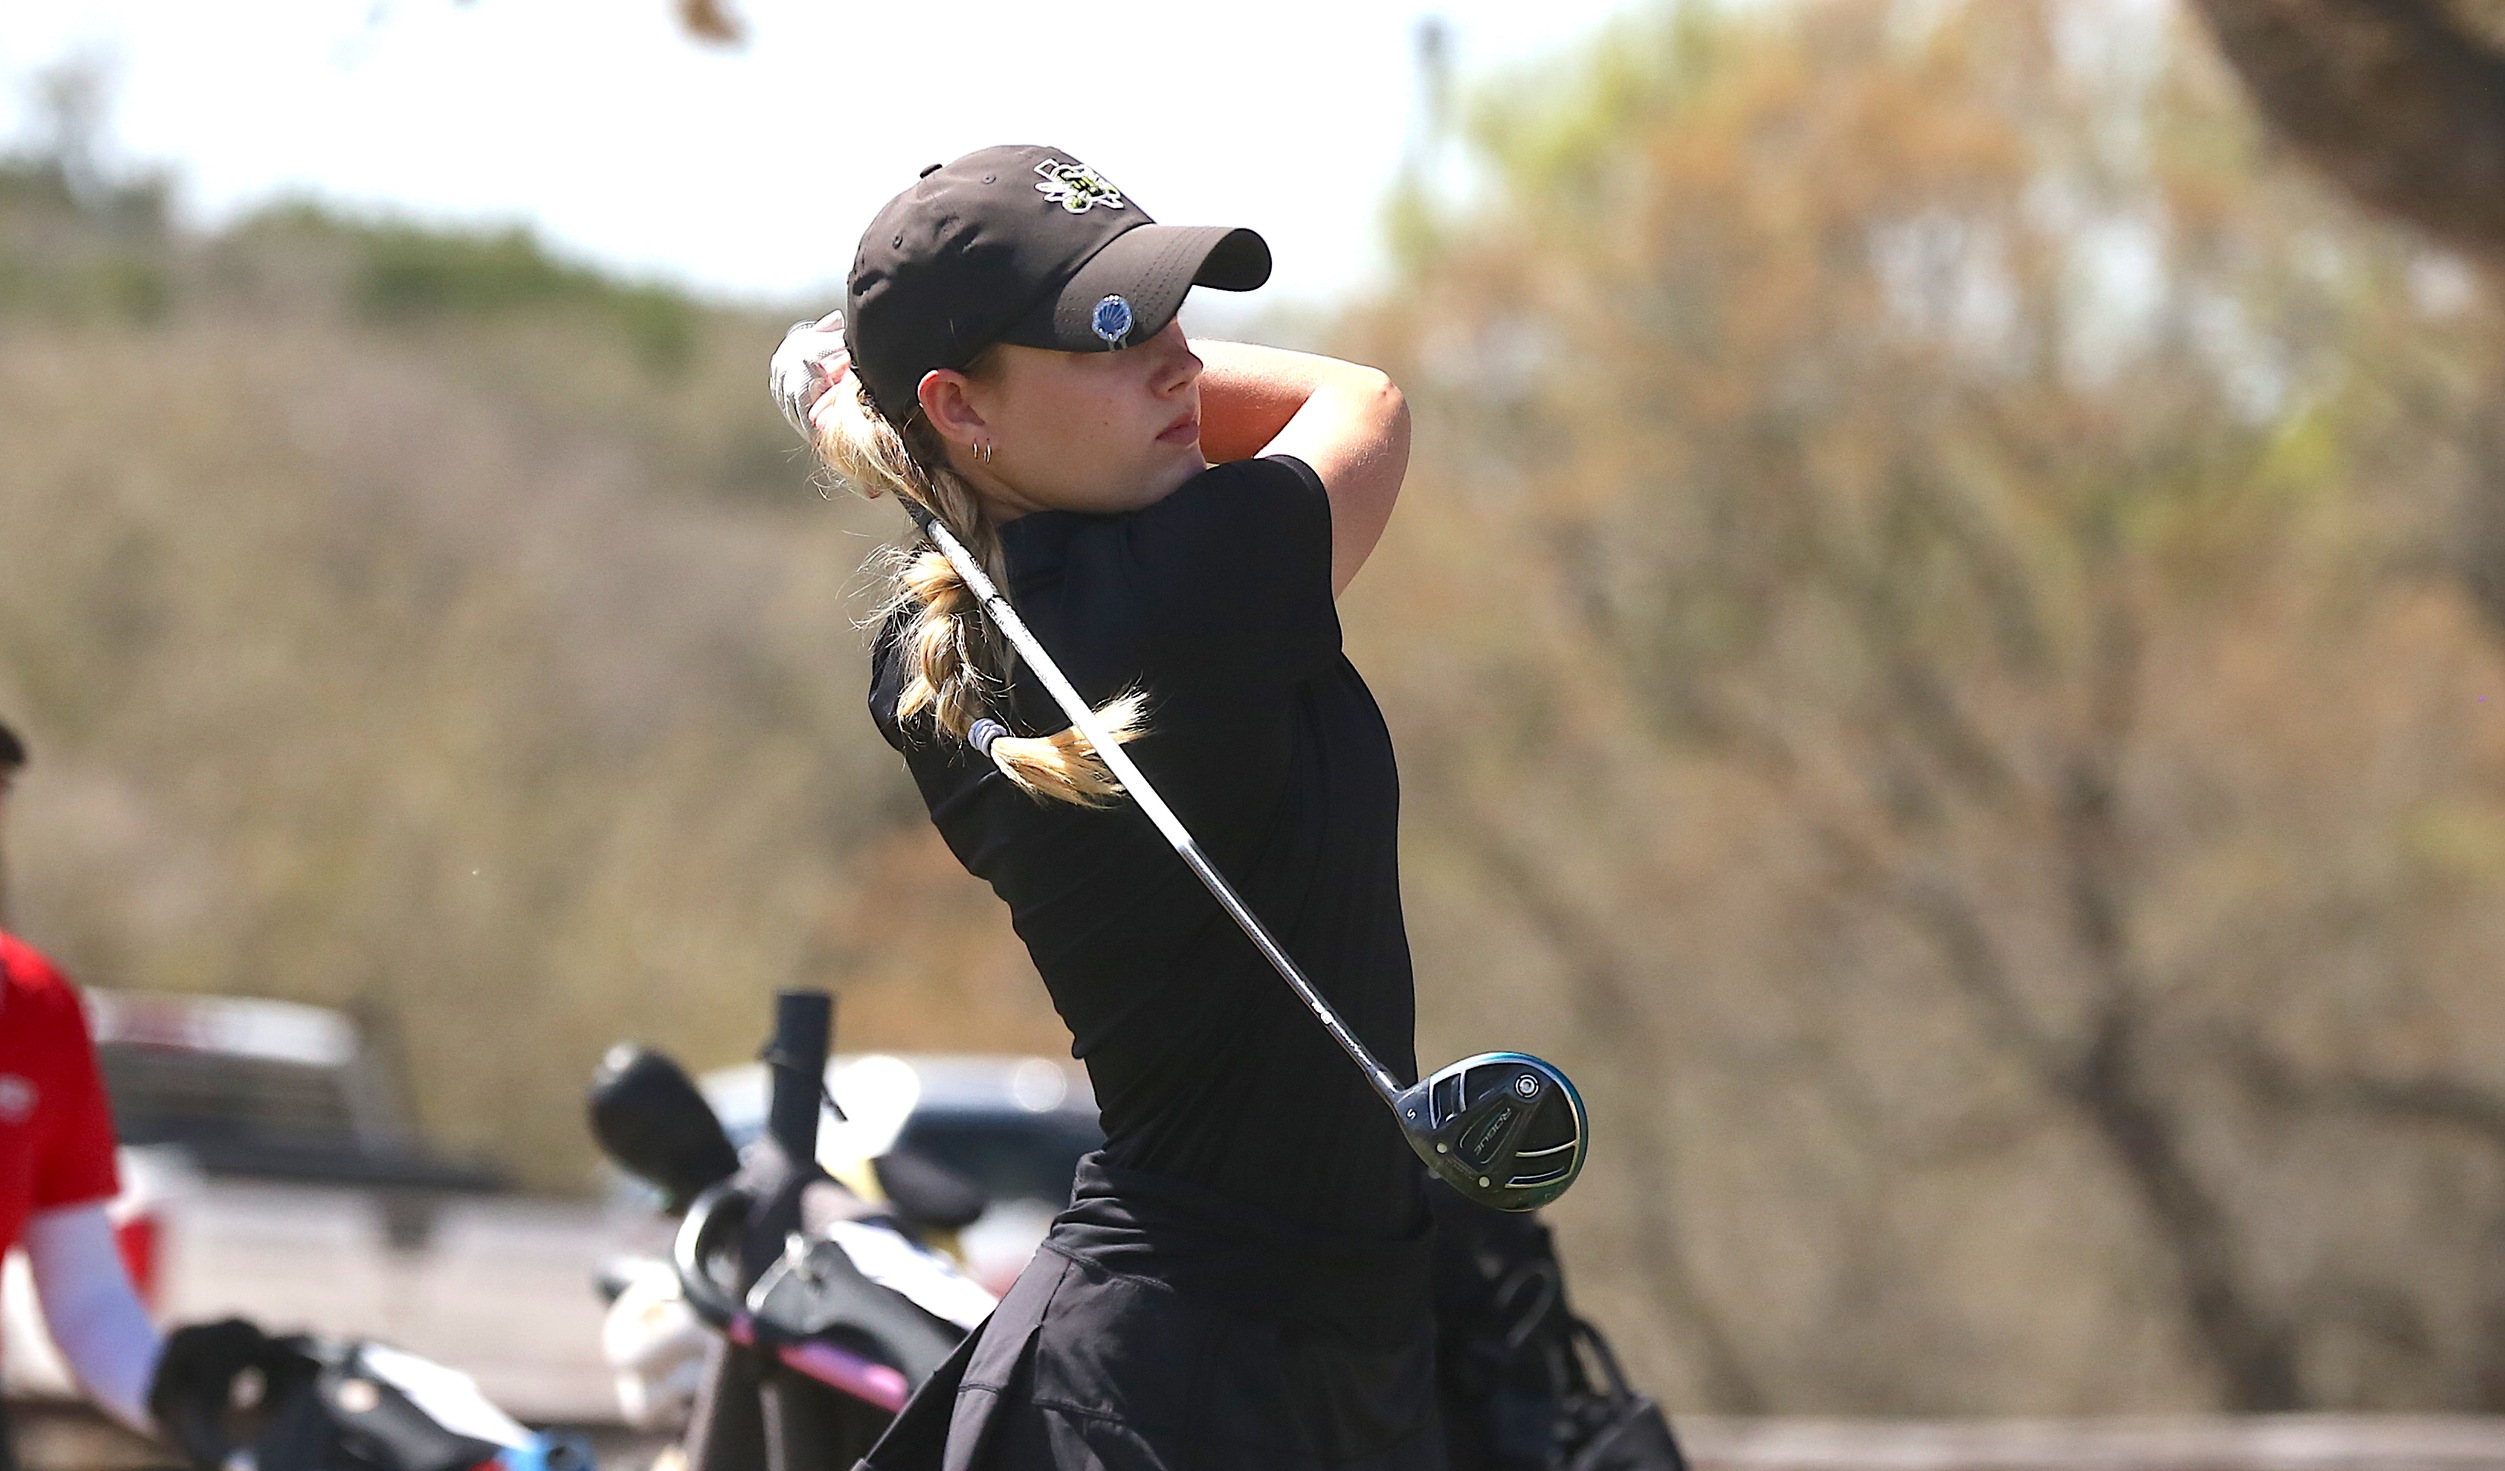 Women's Golf in Top 10 After First Round Of Golfweek Invitational